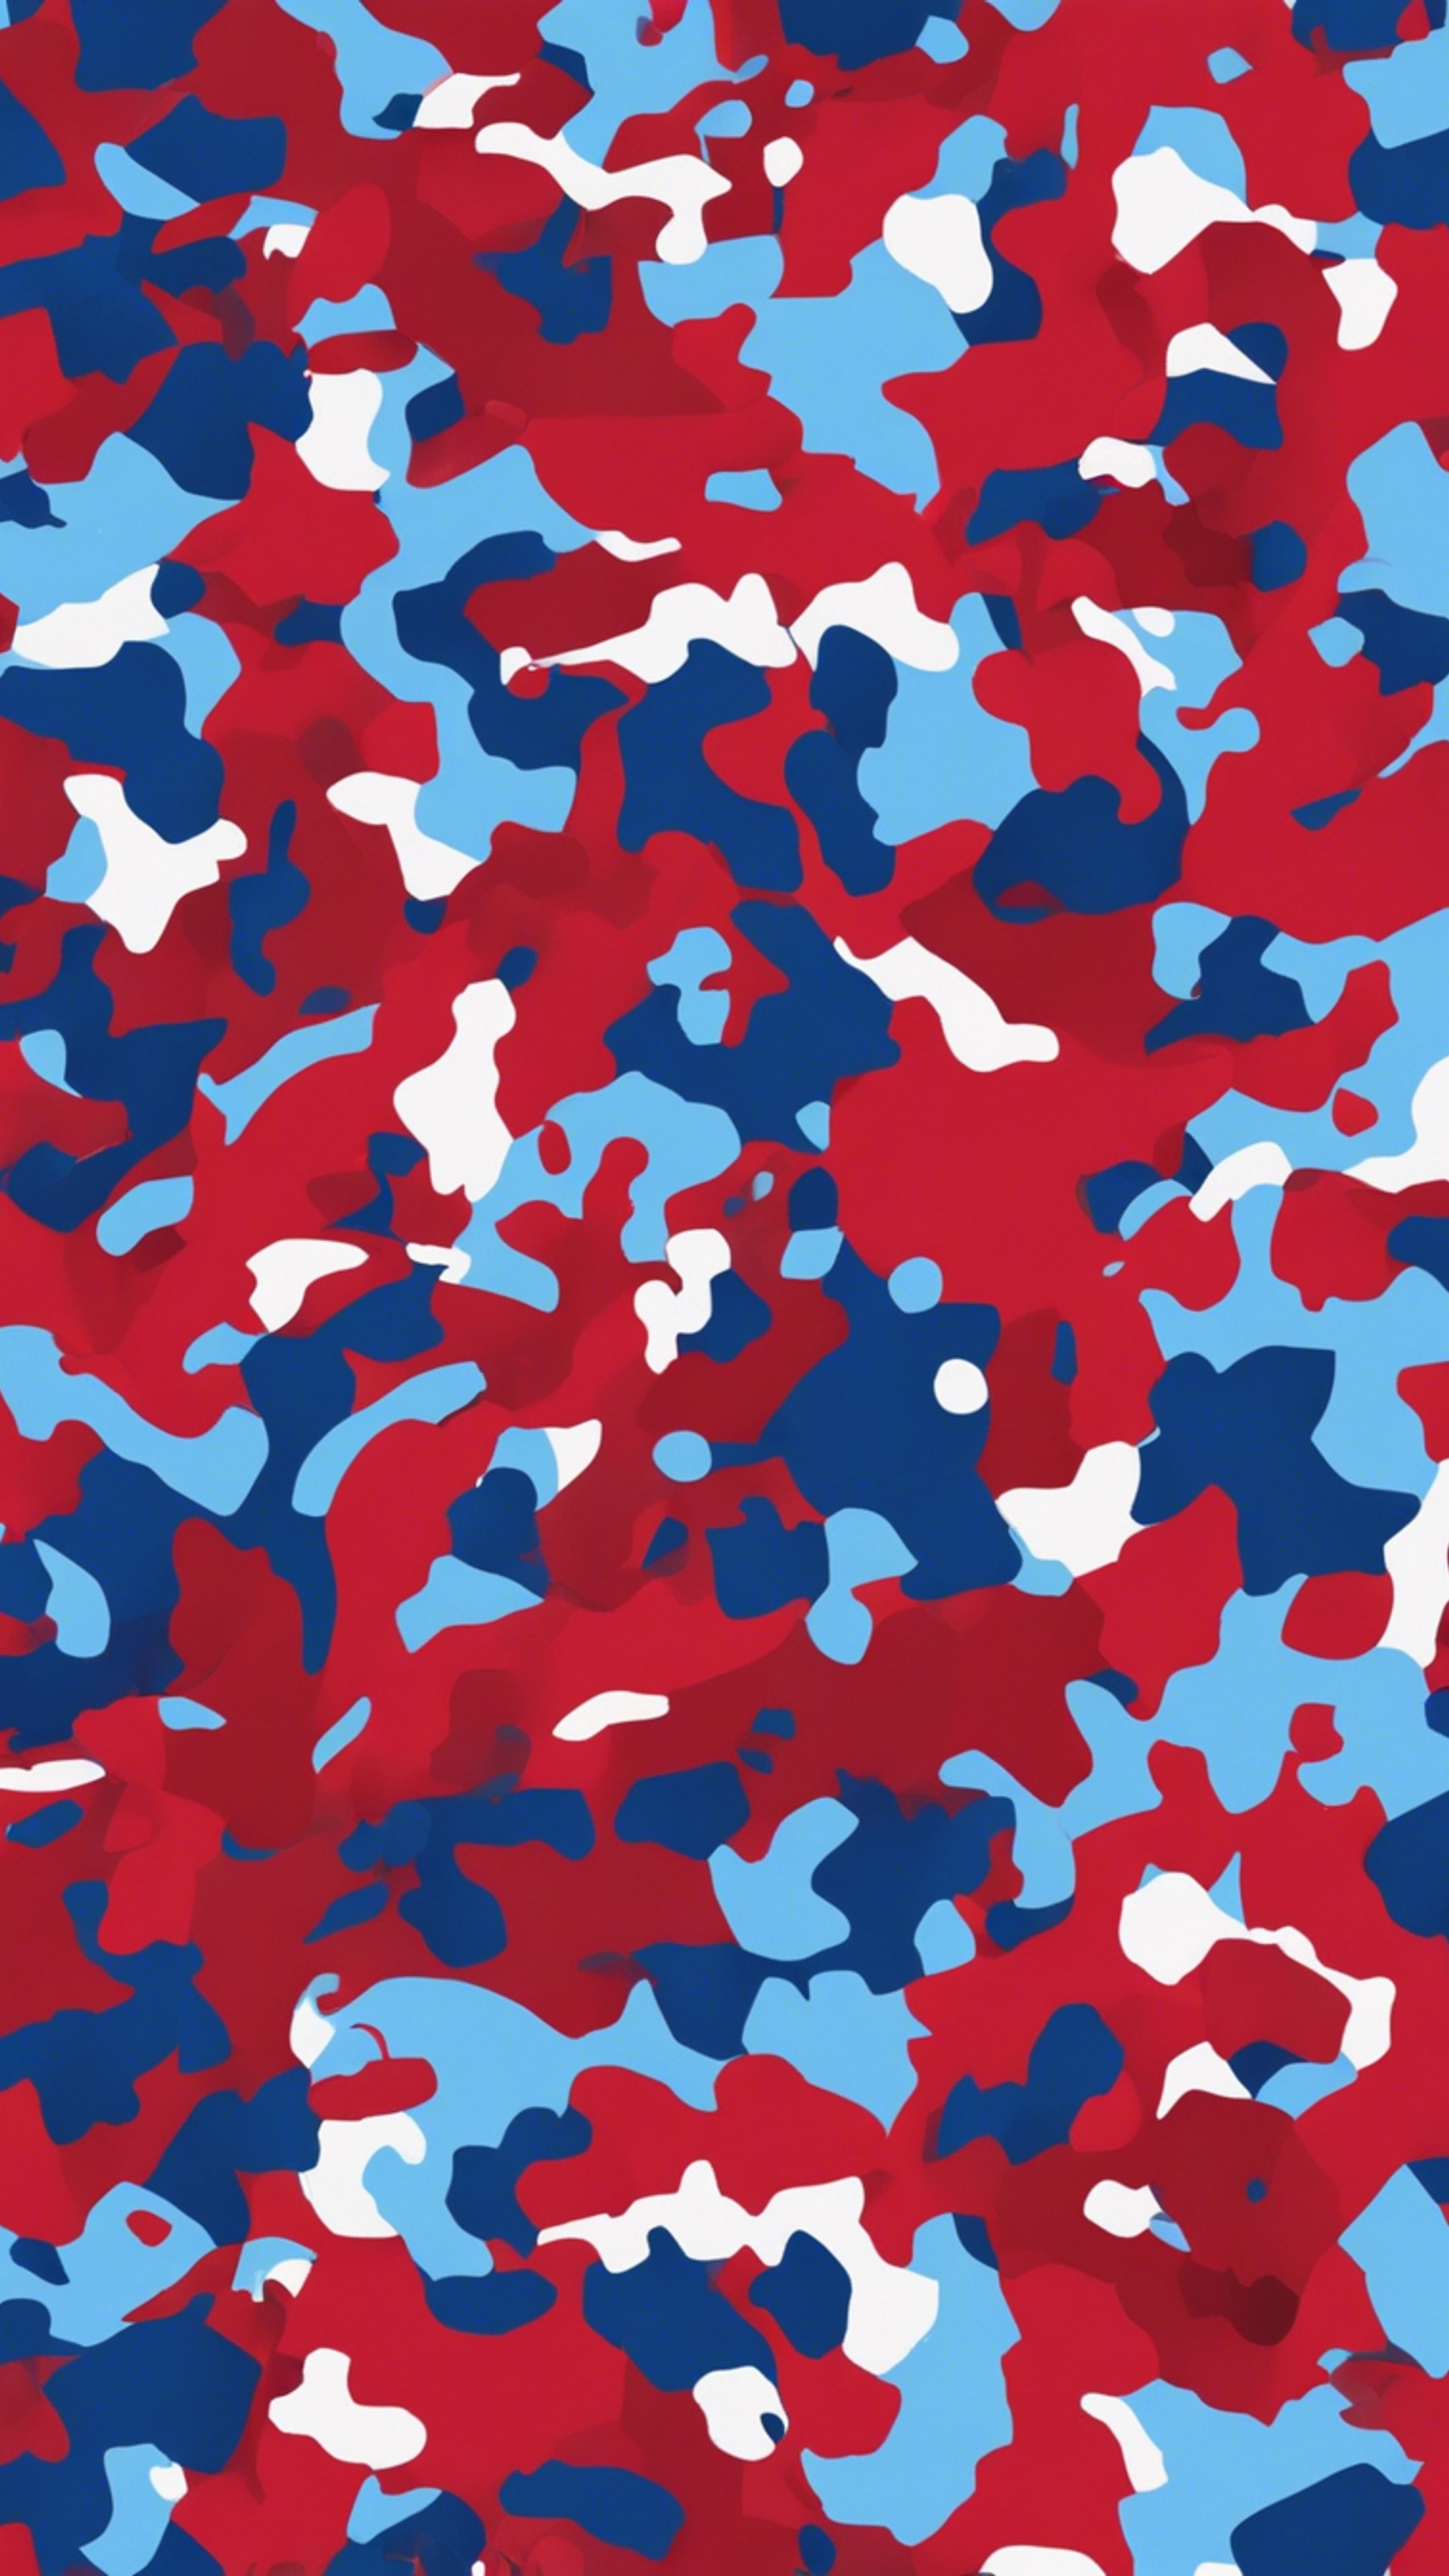 Camouflage pattern in shades of red and blue distributed randomly. Ταπετσαρία[29e12ceb4fee465f920c]